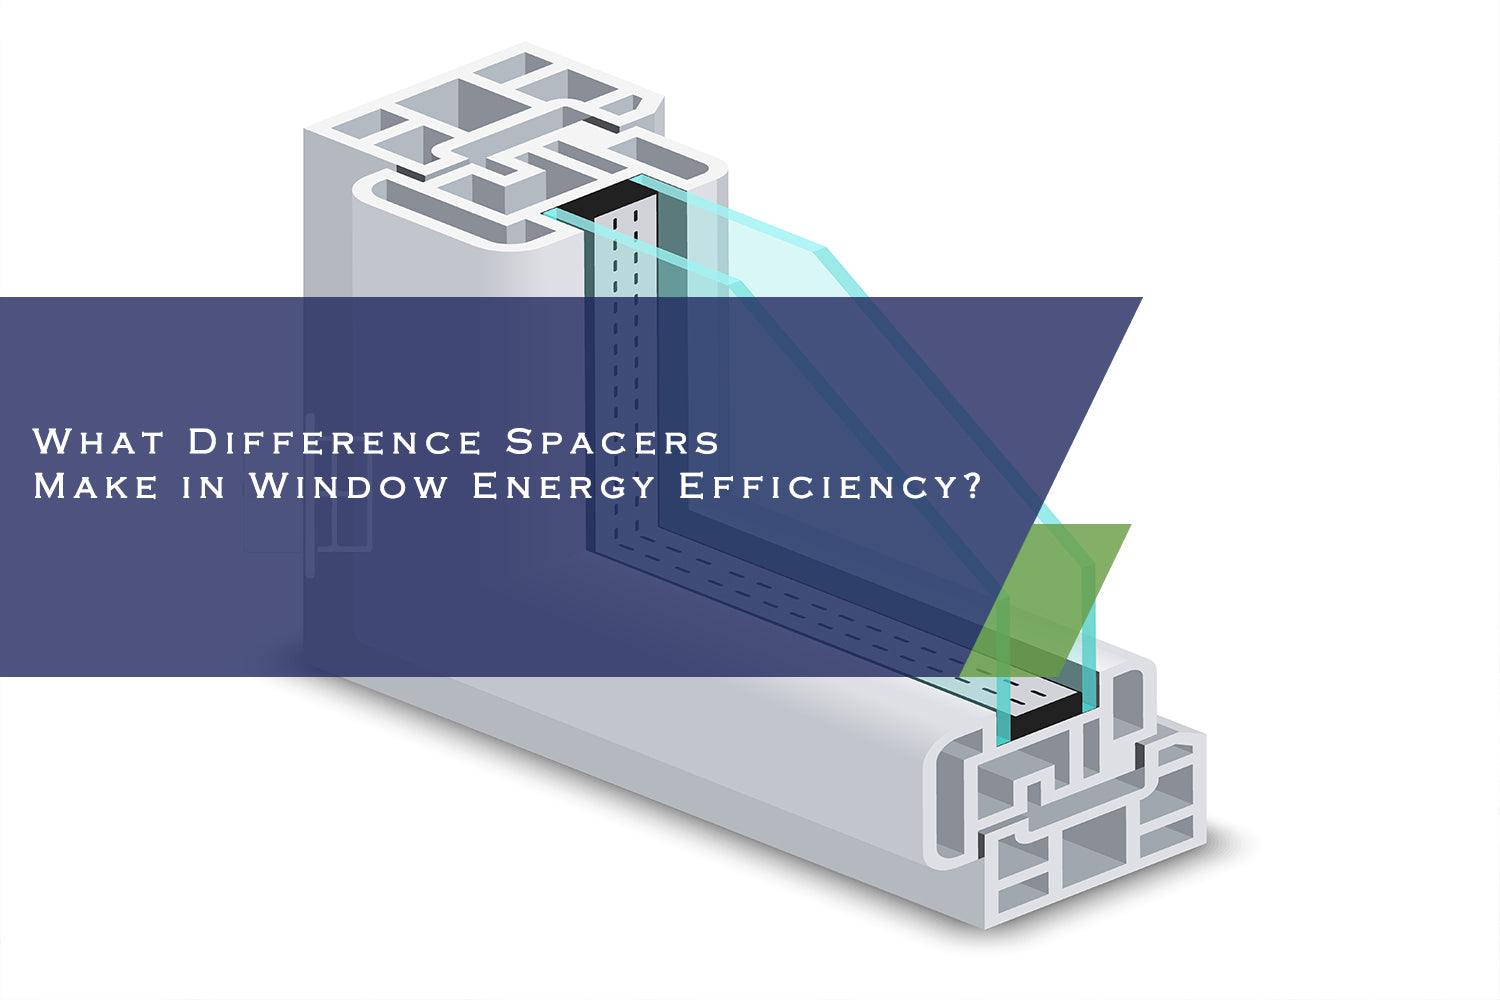 What Difference Spacers Make in Window Energy Efficiency?